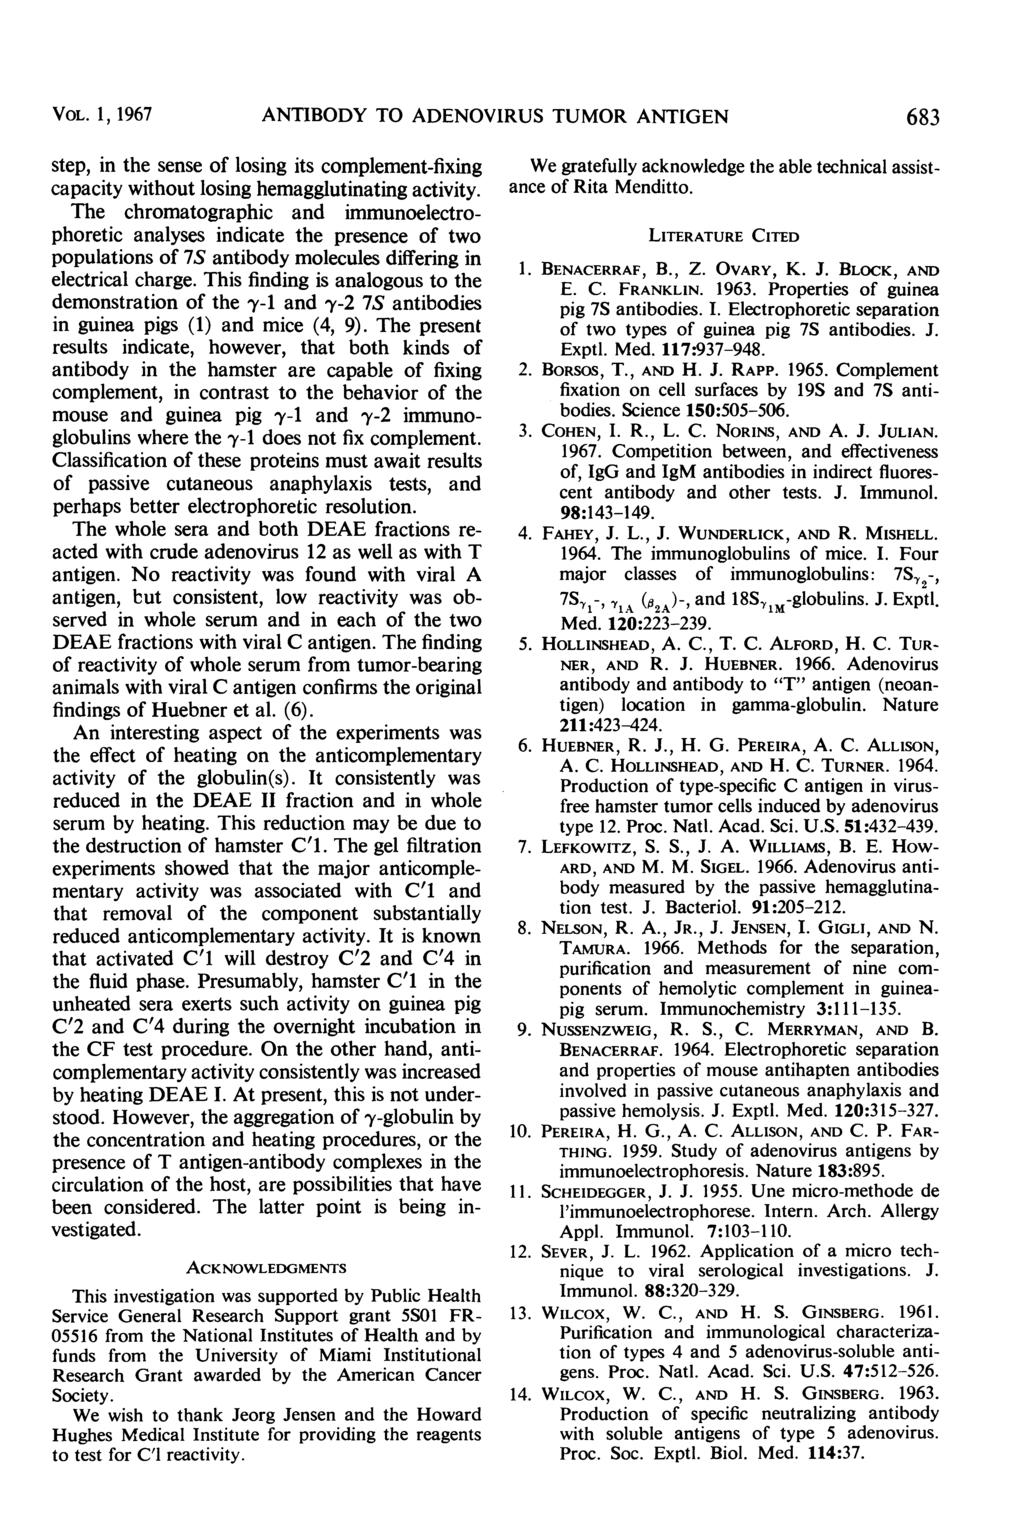 VOL. 1, 1967 ANTIBODY TO ADENOVIRUS TUMOR ANTIGEN 683 step, in the sense of losing its complement-fixing capacity without losing hemagglutinating activity.